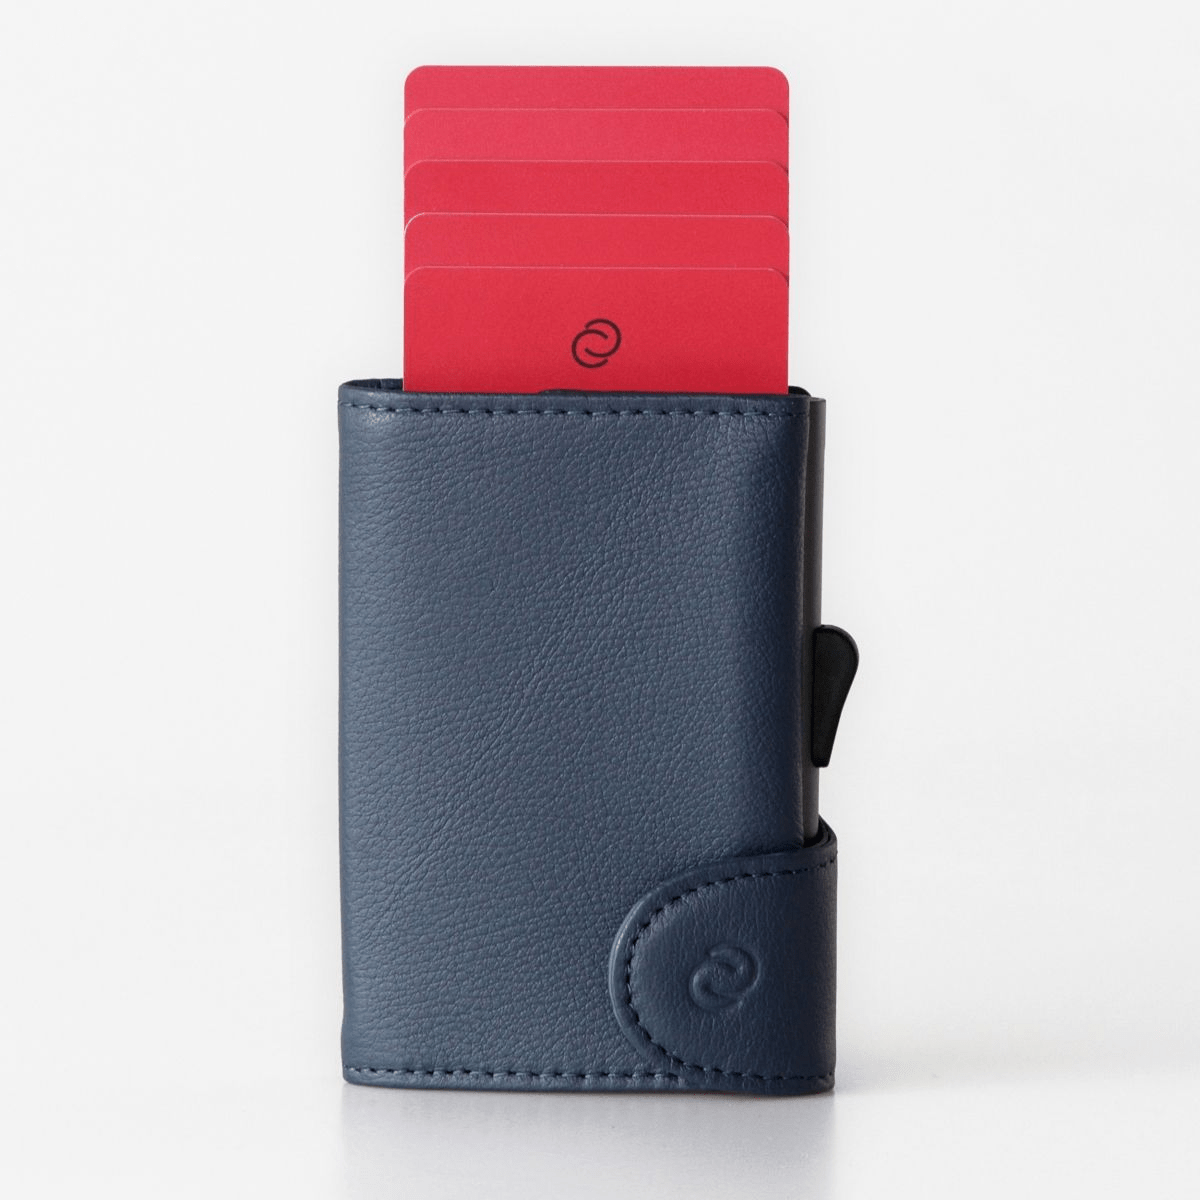 C-Secure Aluminum Card Holder with Genuine Leather and Coin Pouch - XD Design